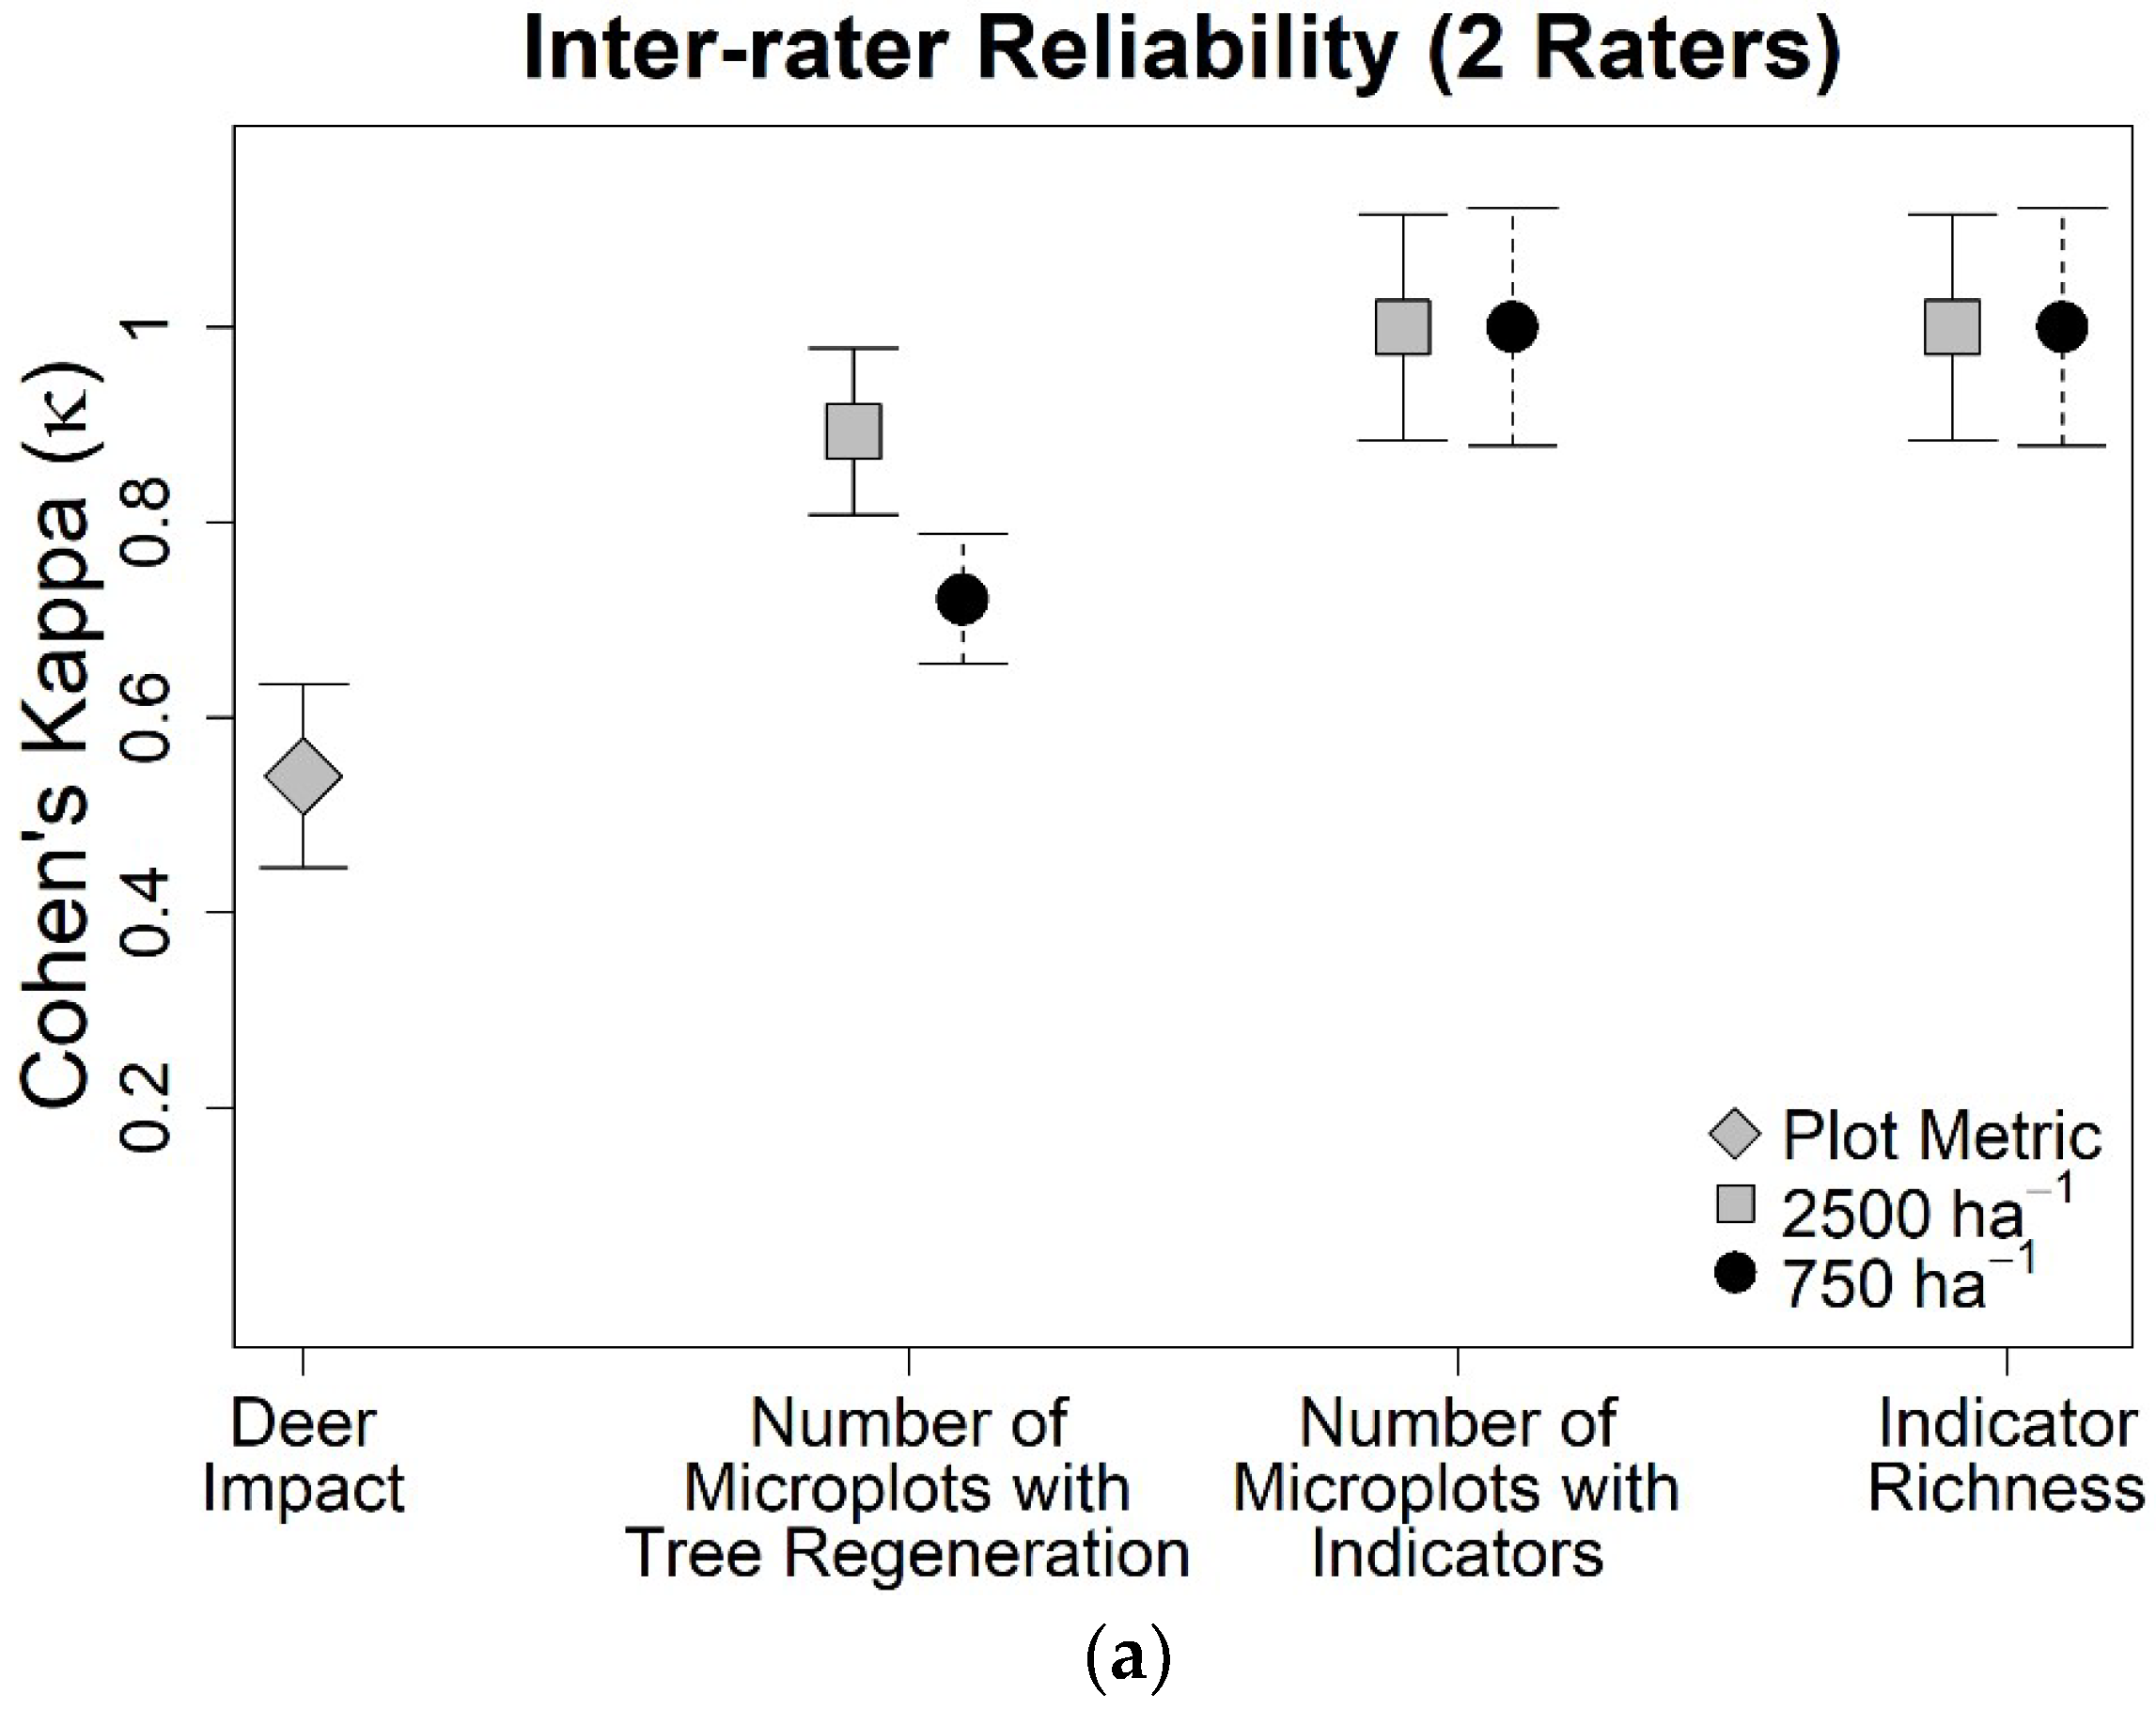 Forests | Free Full-Text | Evaluating Inter-Rater Reliability and  Statistical Power of Vegetation Measures Assessing Deer Impact